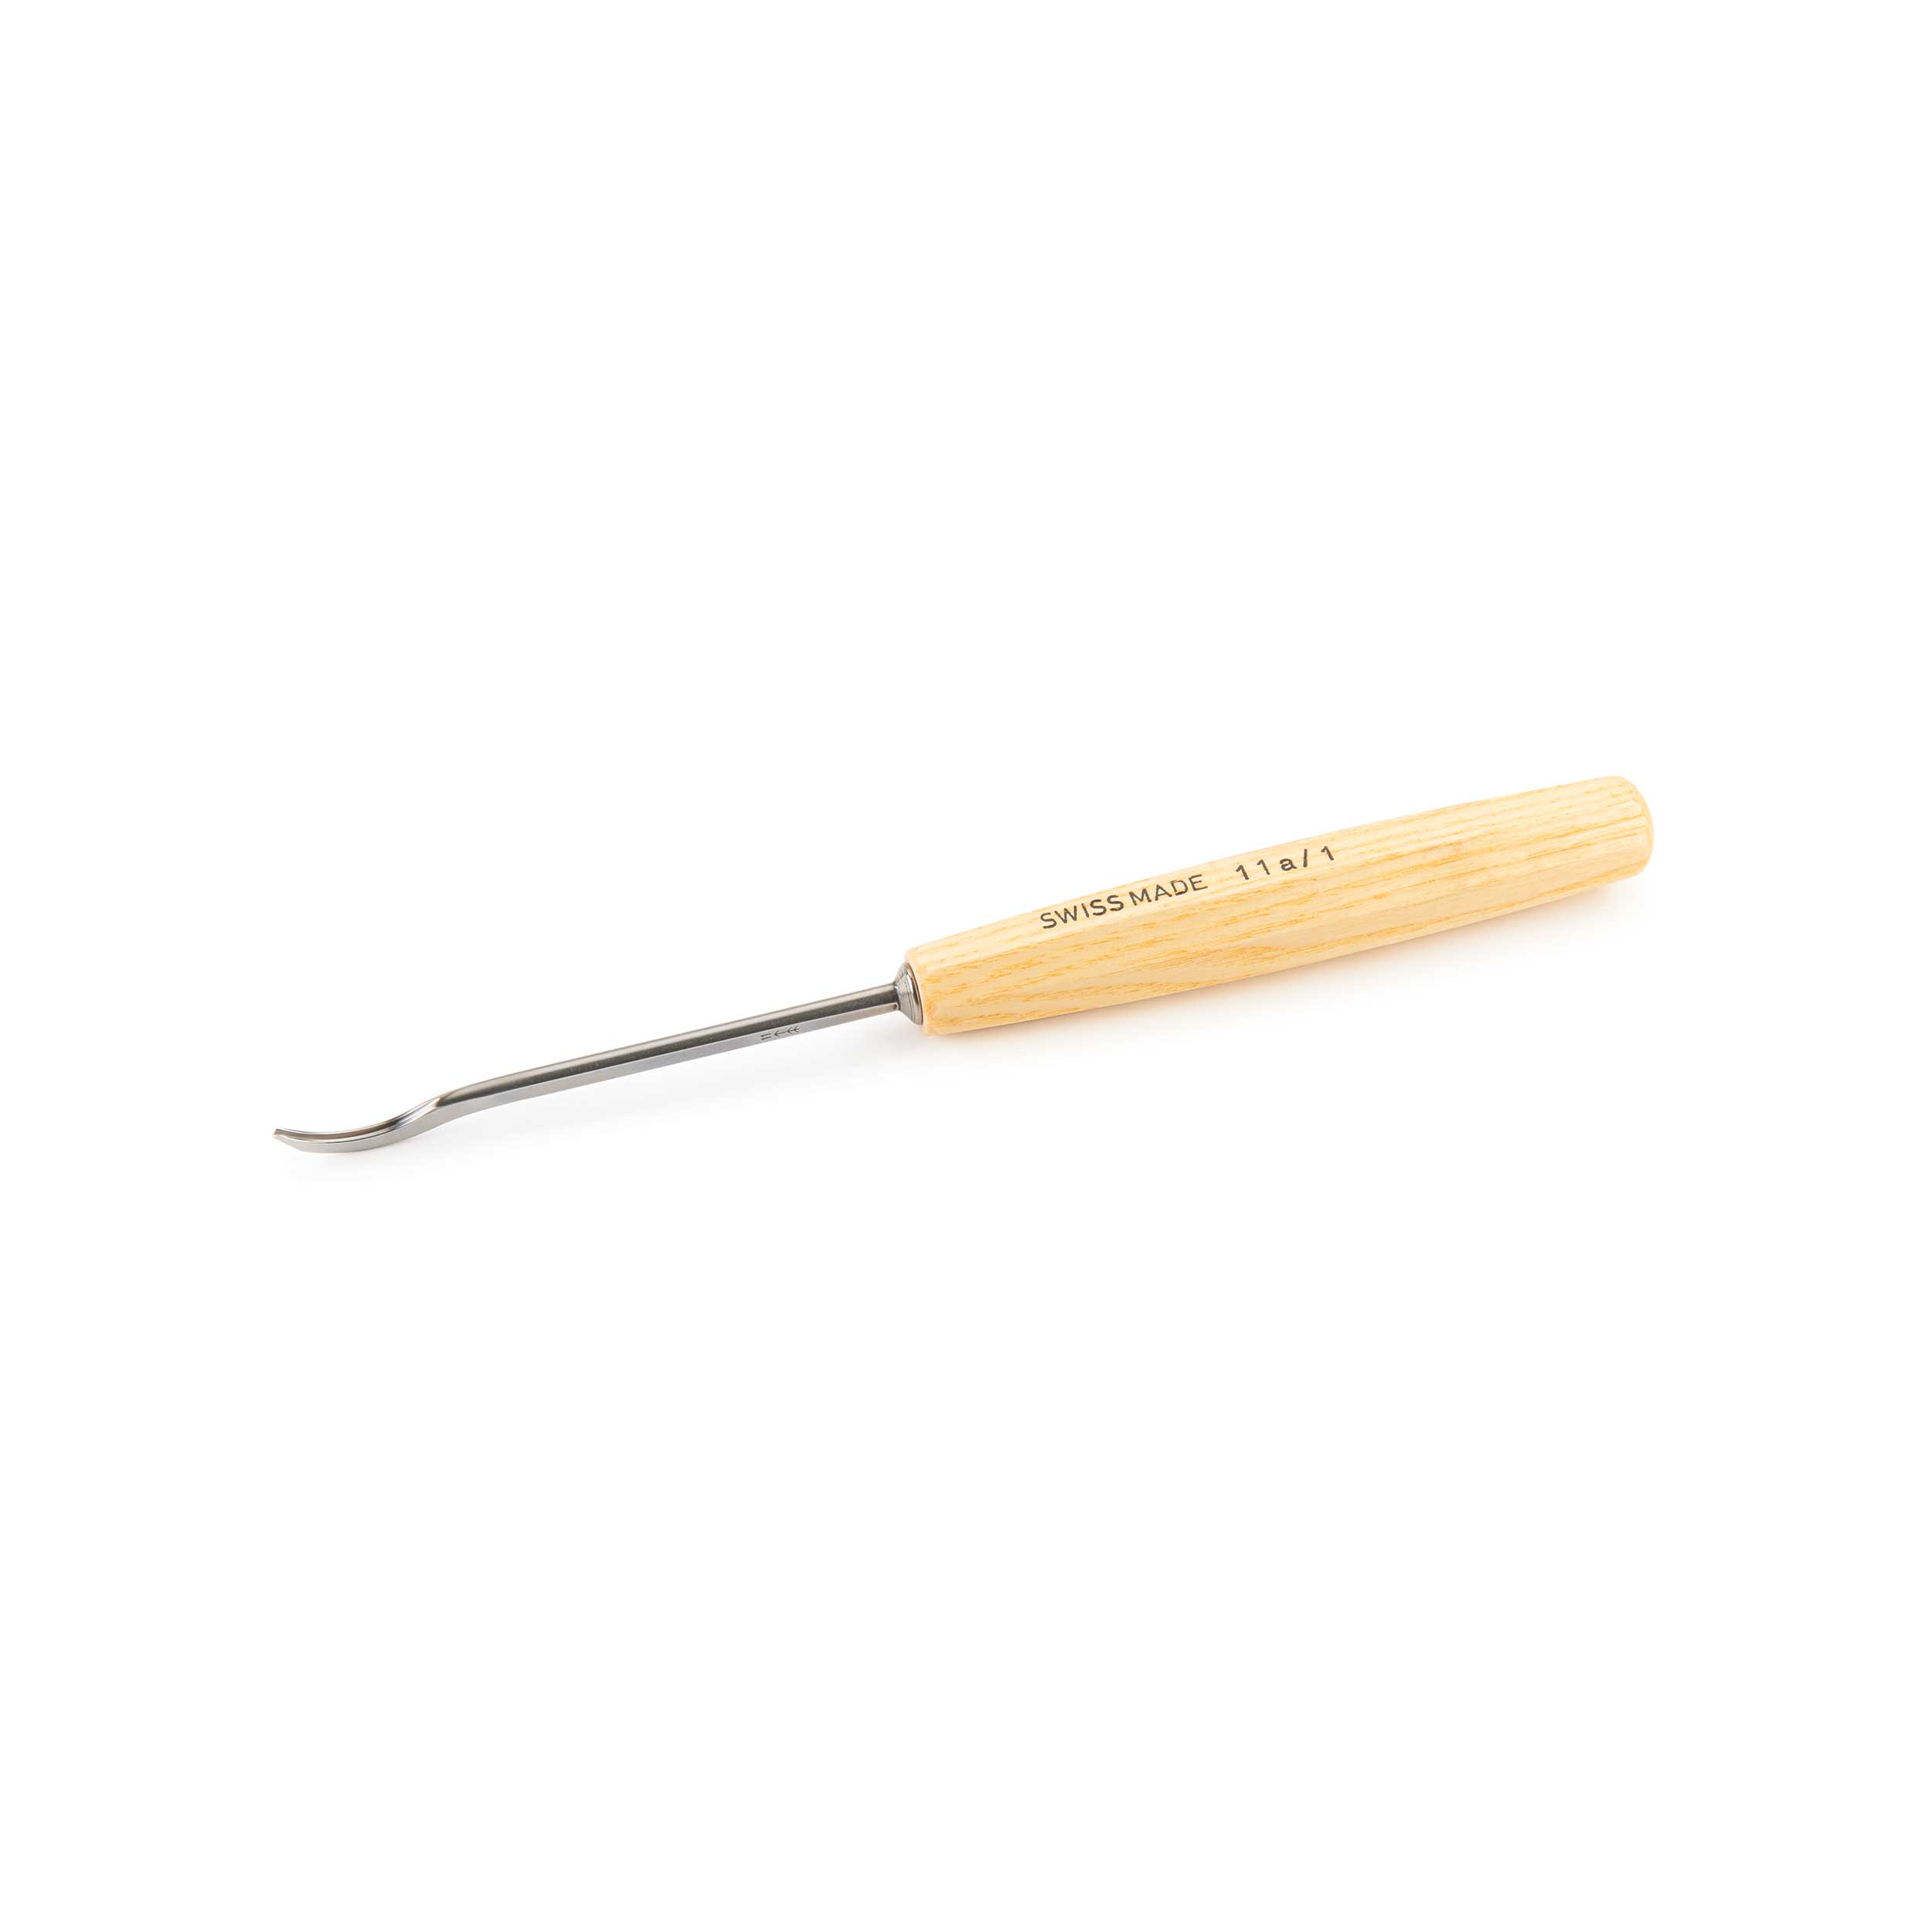 #11 Sweep Spoon Gouge 1 Mm, Full Size